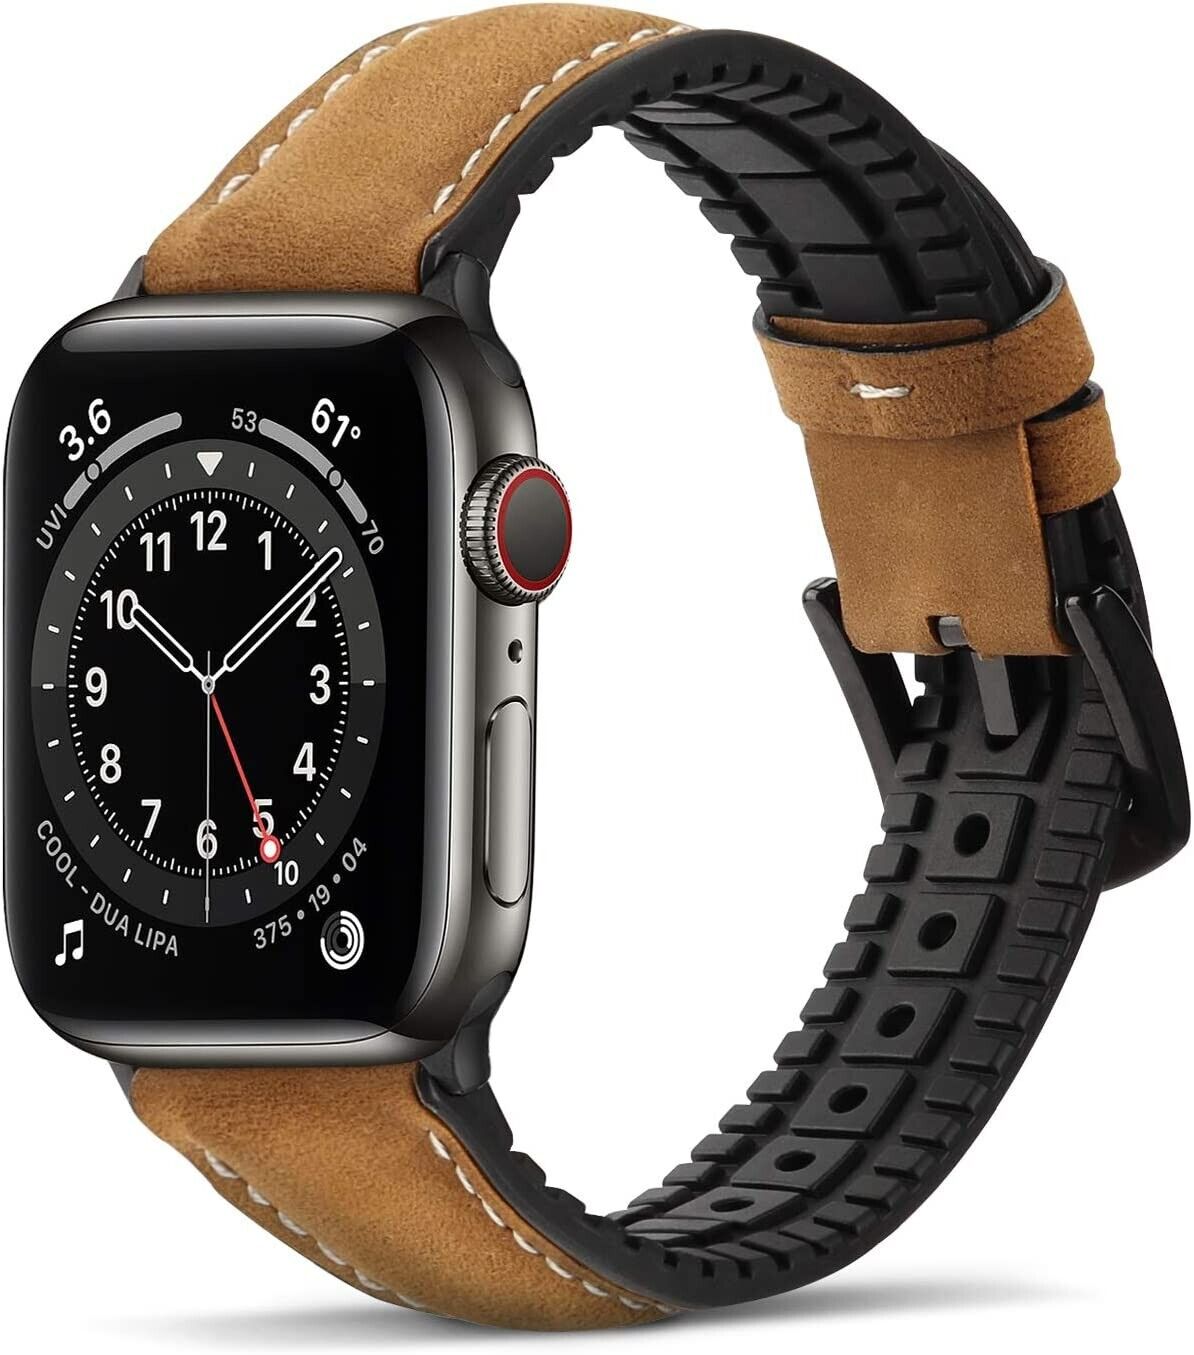 Bisikor Compatible with Apple Watch Strap 38mm 40mm, Genuine Leather and Soft Silicone Hybrid Sports Replacement Straps Compatible with Apple Watch - Brown